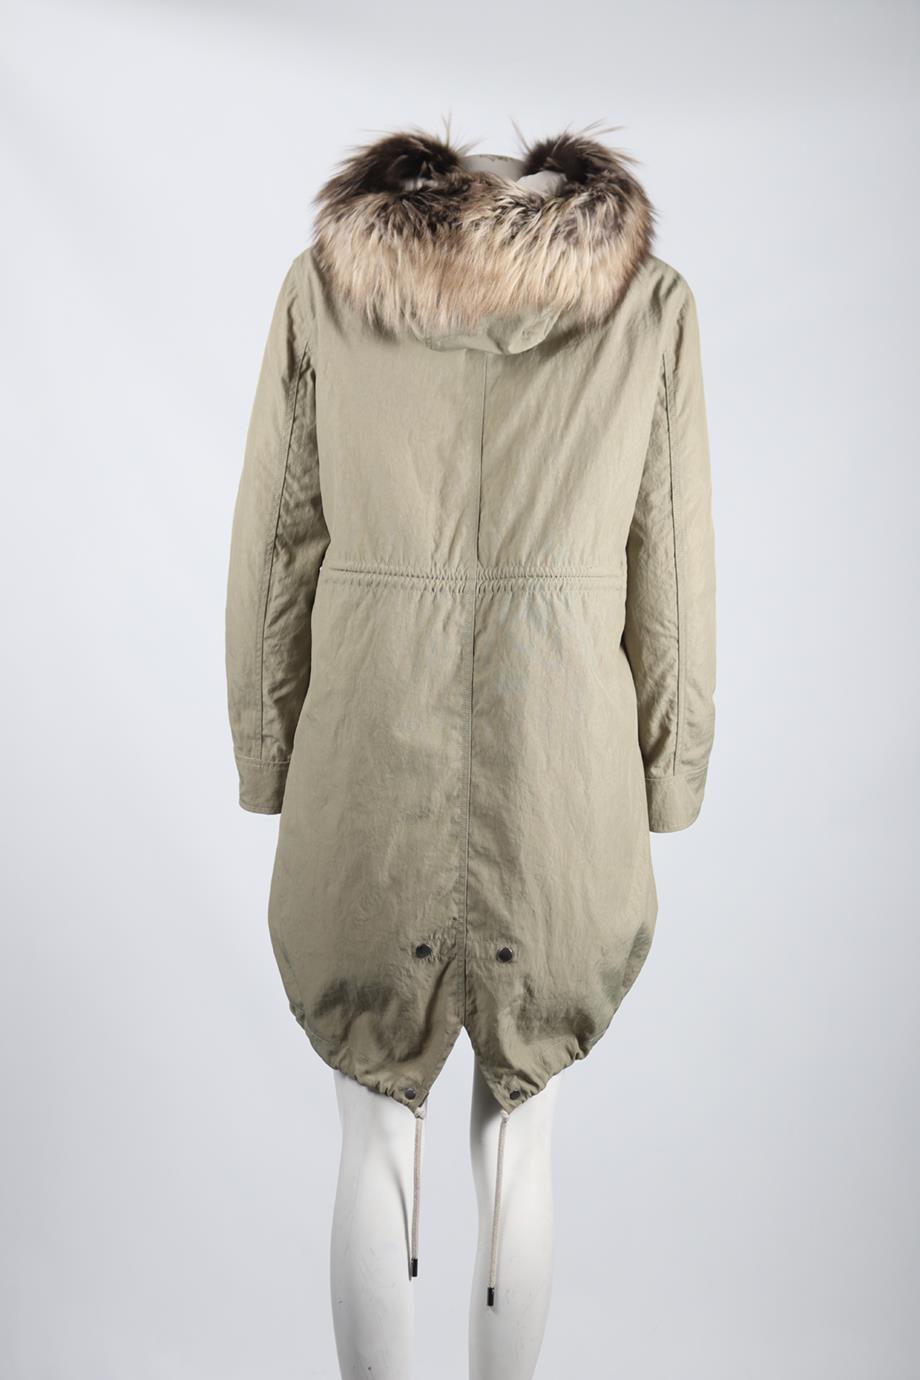 ARMY BY YVES SOLOMON FOX FUR AND SHELL DOWN COAT FR 36 UK 8